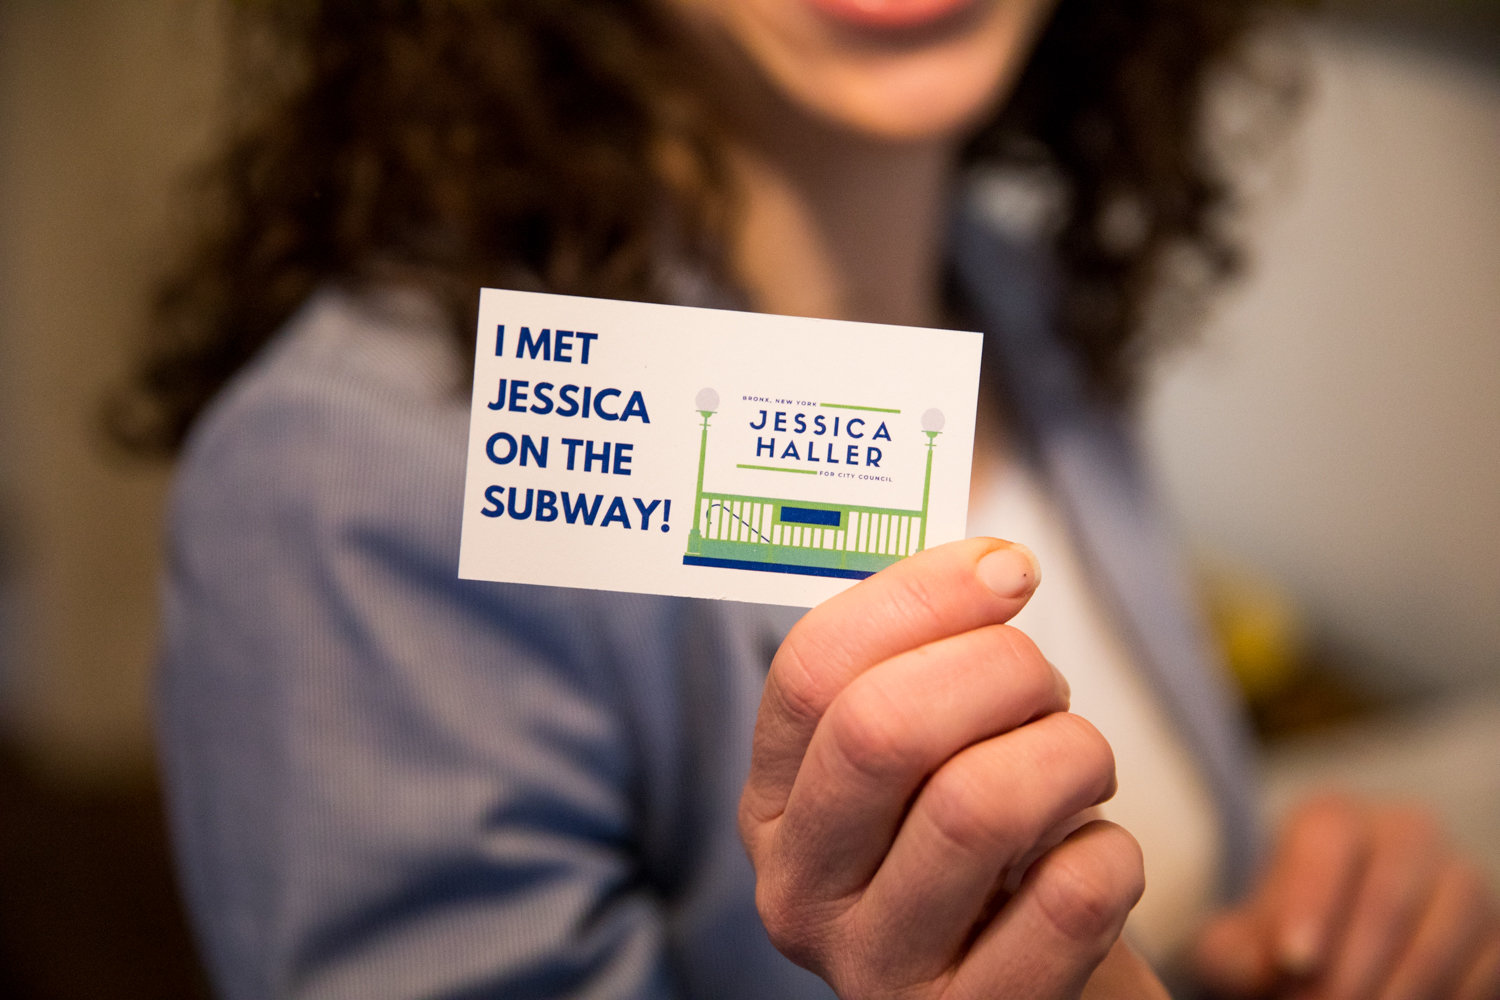 Transit is a part of Jessica Haller’s city council campaign platform. And to that end, she’s made campaign cards to hand out to people on the subway.